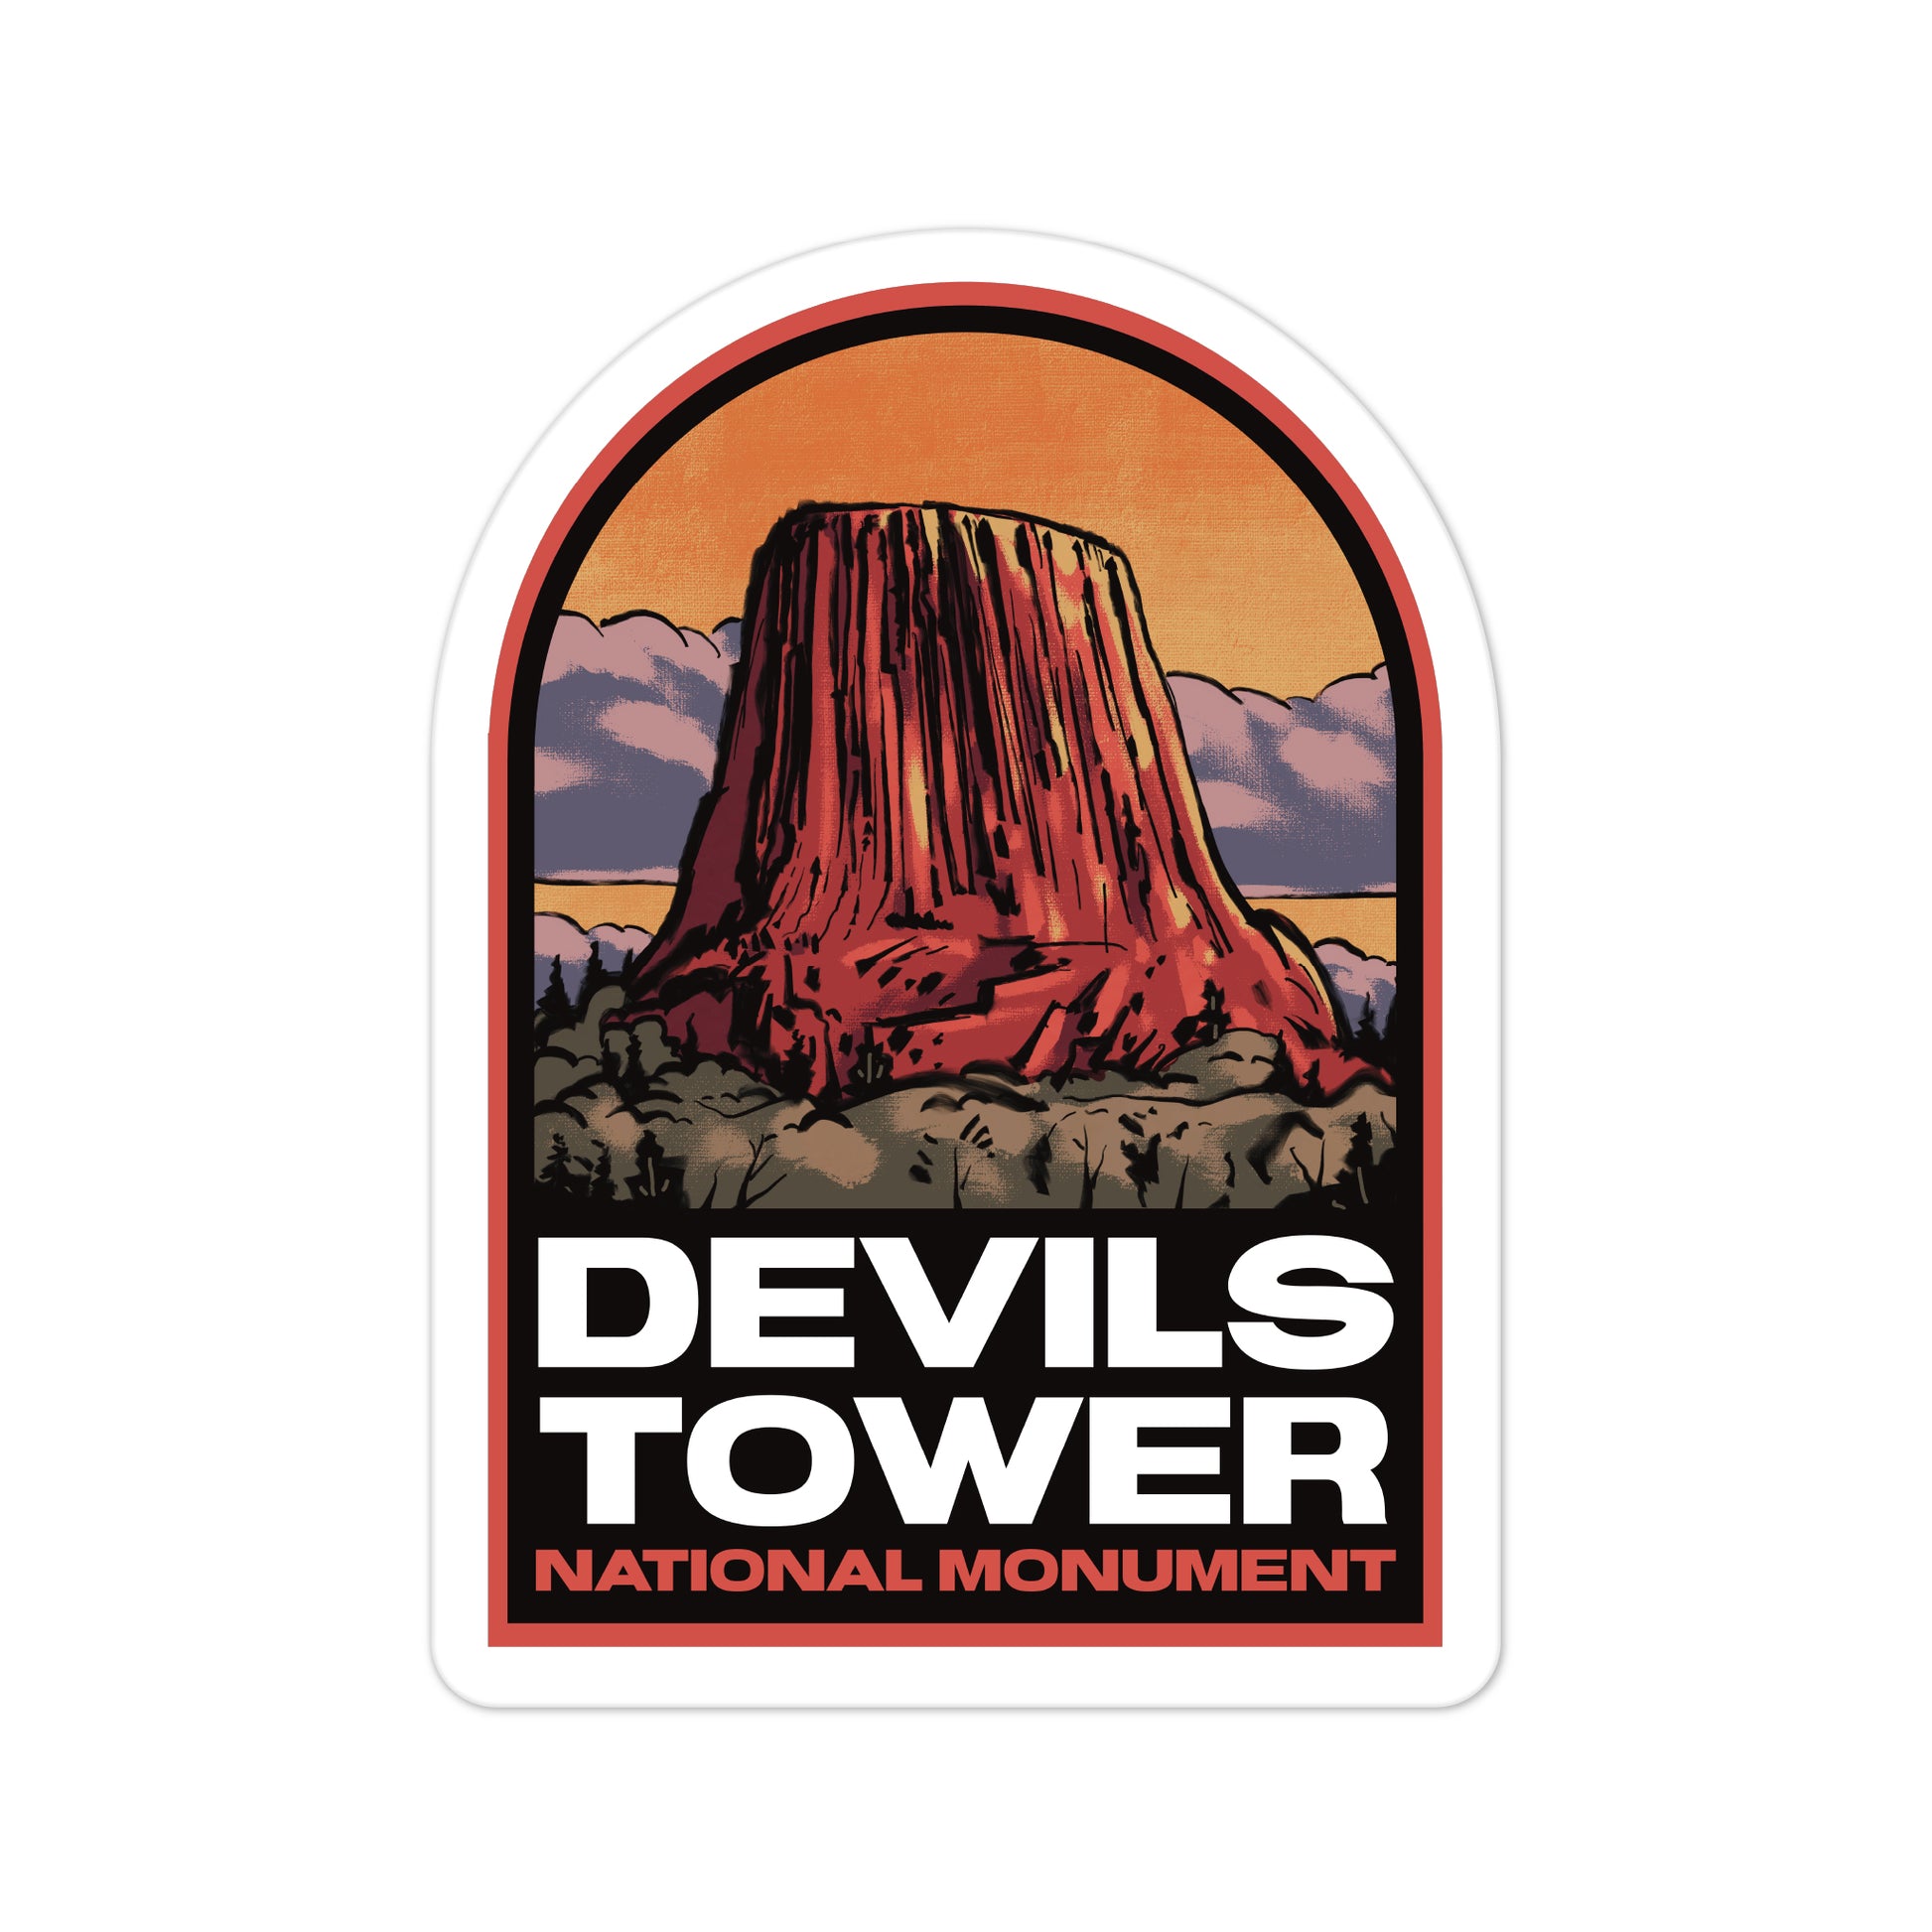 A sticker of Devils Tower National Monument